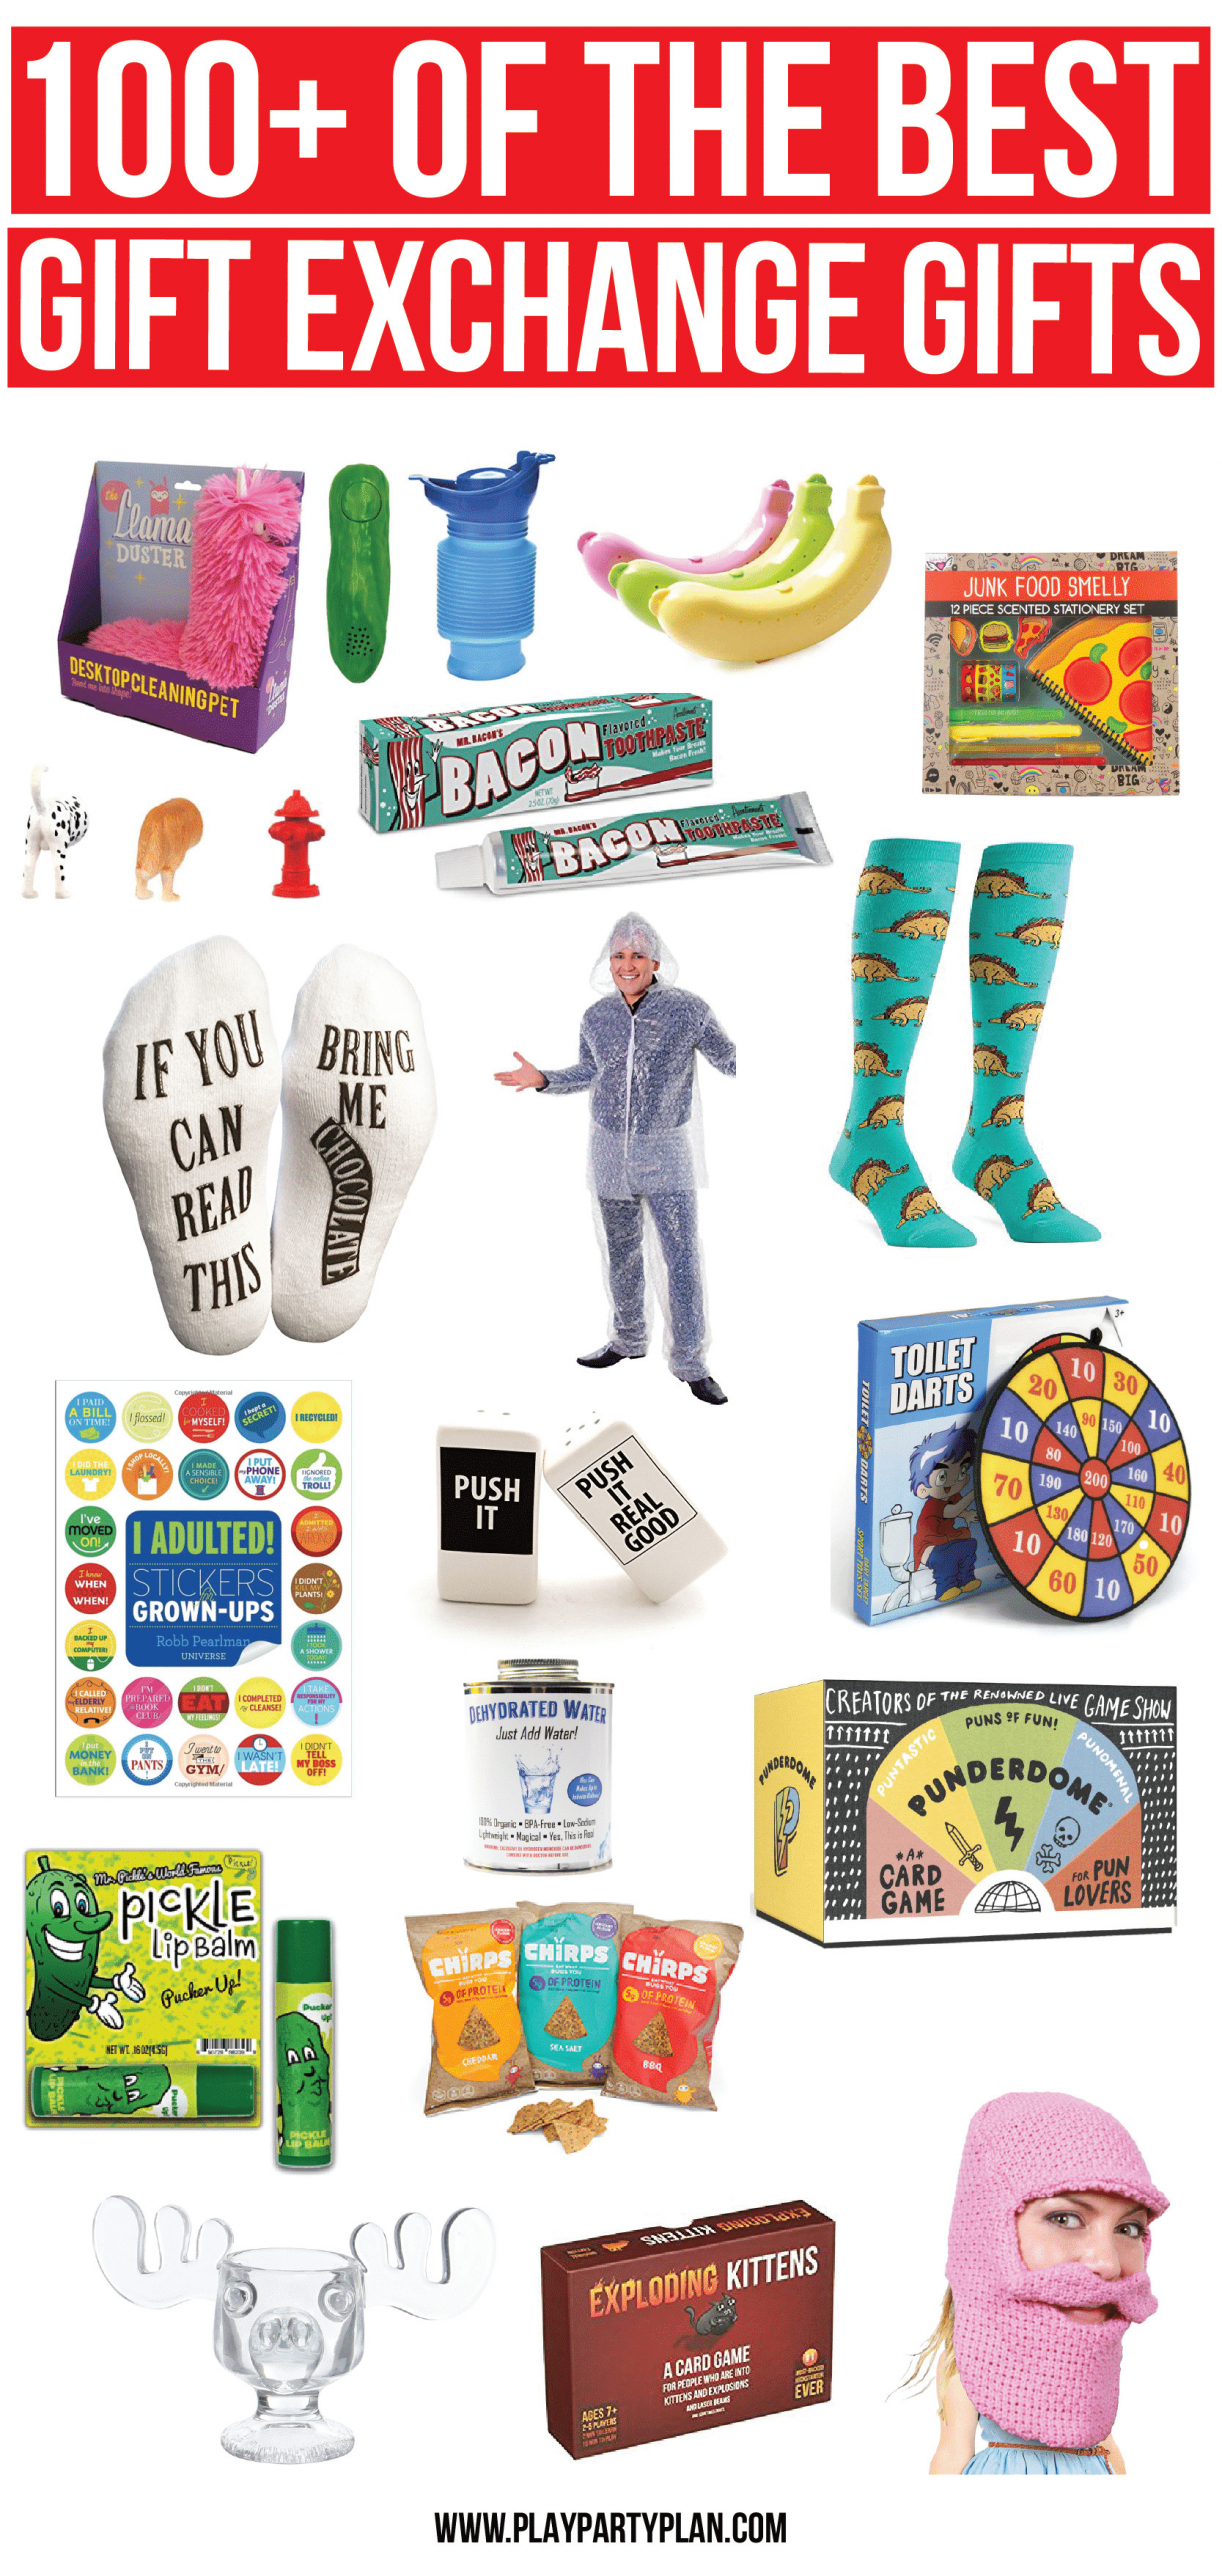 Fun Holiday Gift Exchange Ideas
 100 of the Best White Elephant Gifts & Other Gift Ideas